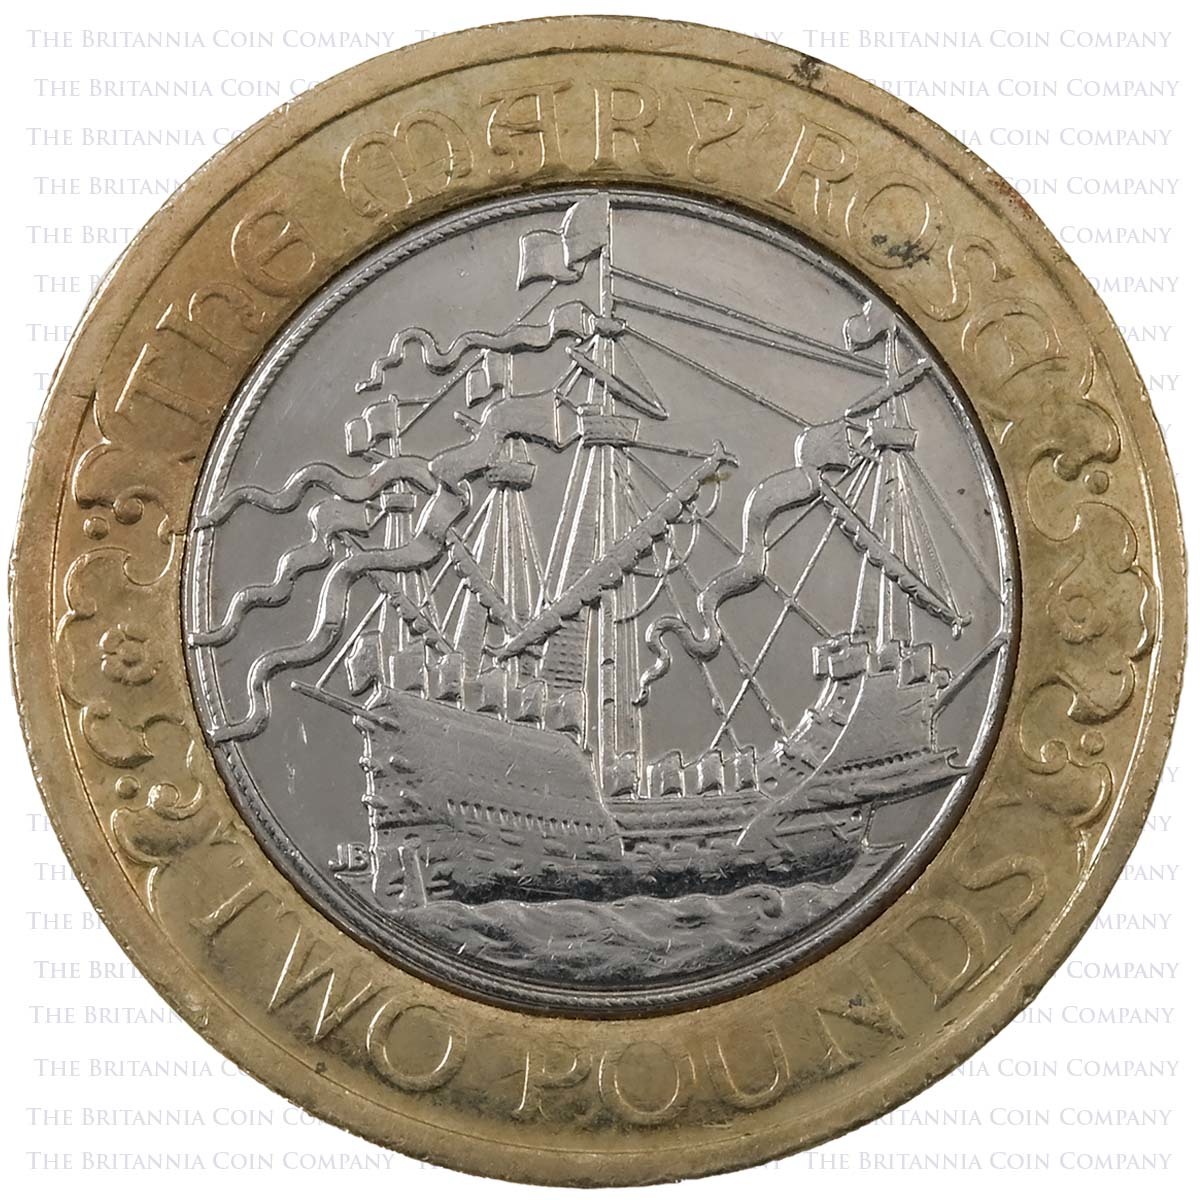 2011 Mary Rose Circulated Two Pound Coin Reverse